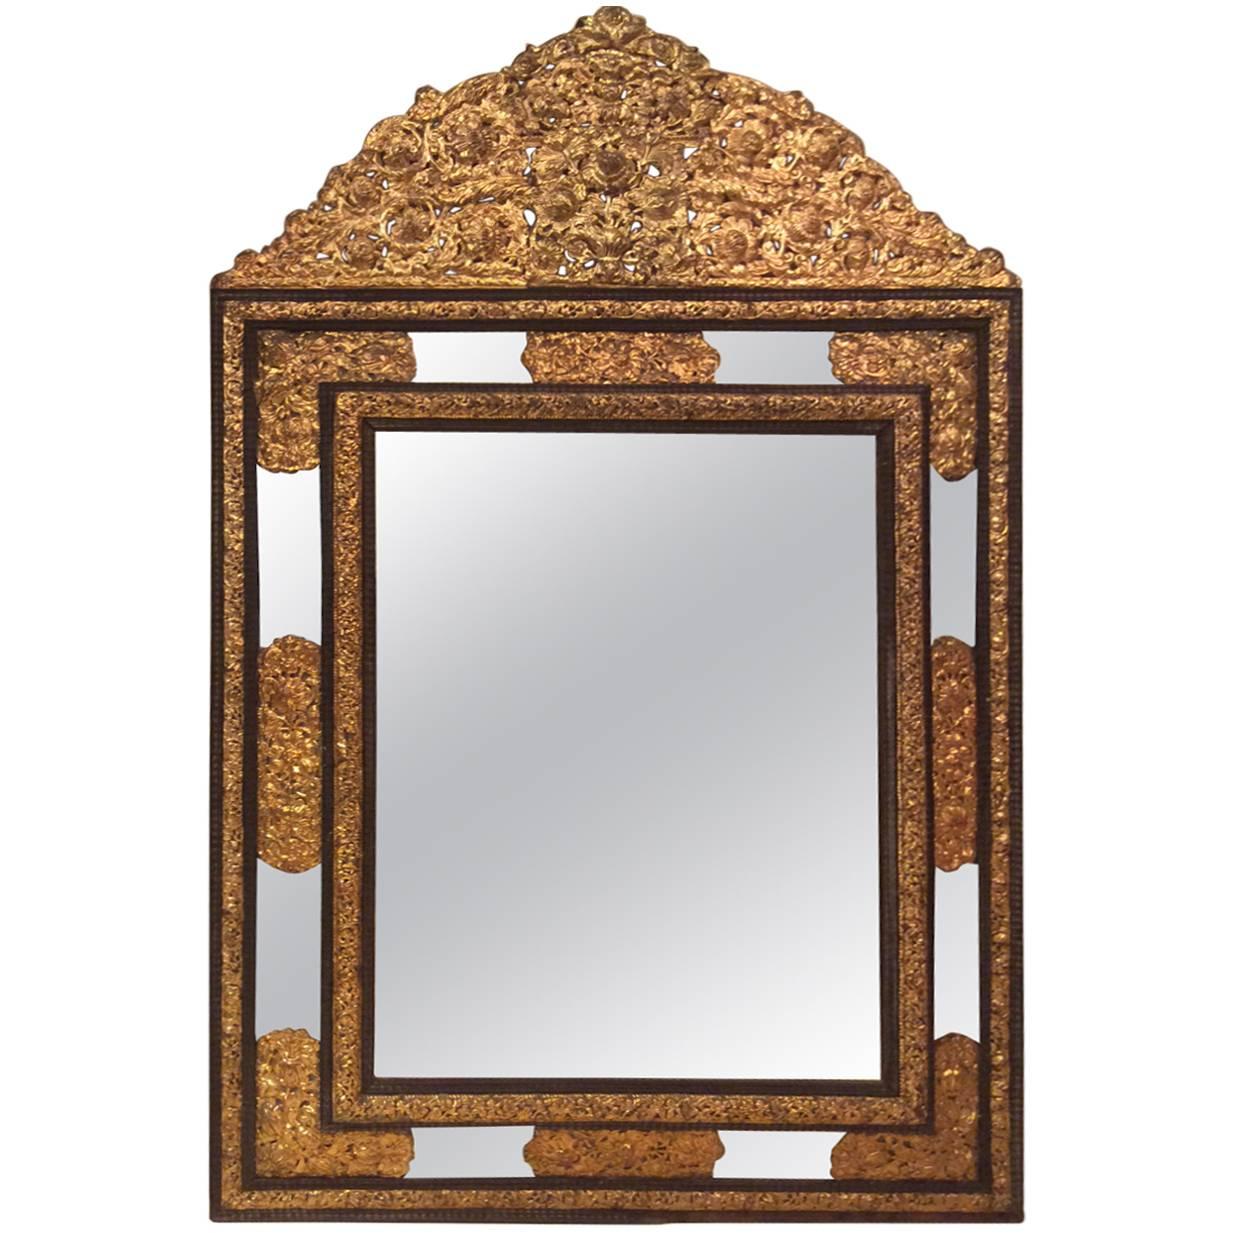 19th Century Large Mirror in the Style of Louis XIII, France, circa 1850